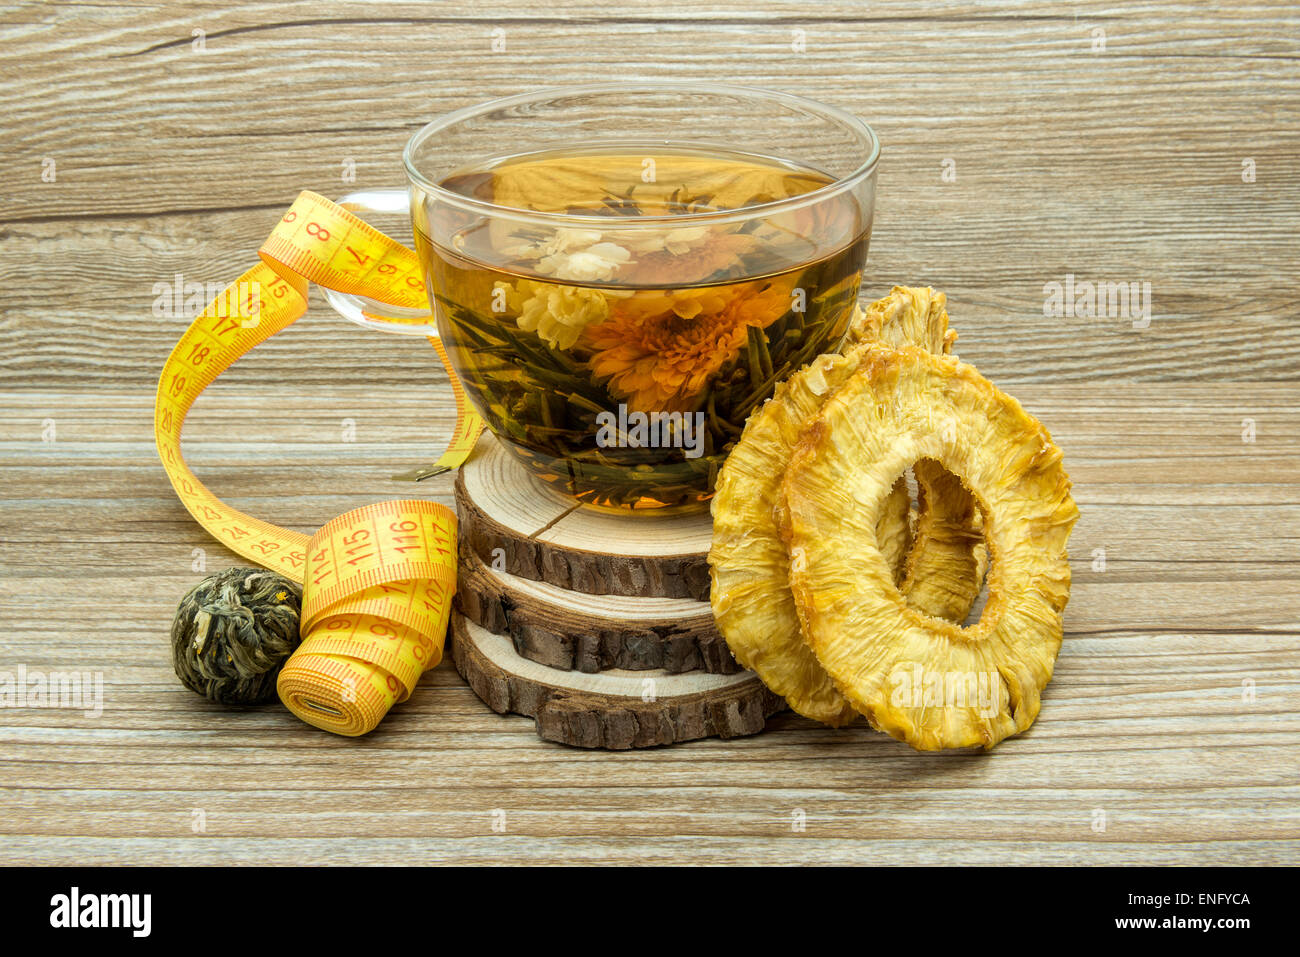 Dietary jasmine tea and dried pineapple on a wooden background. Stock Photo